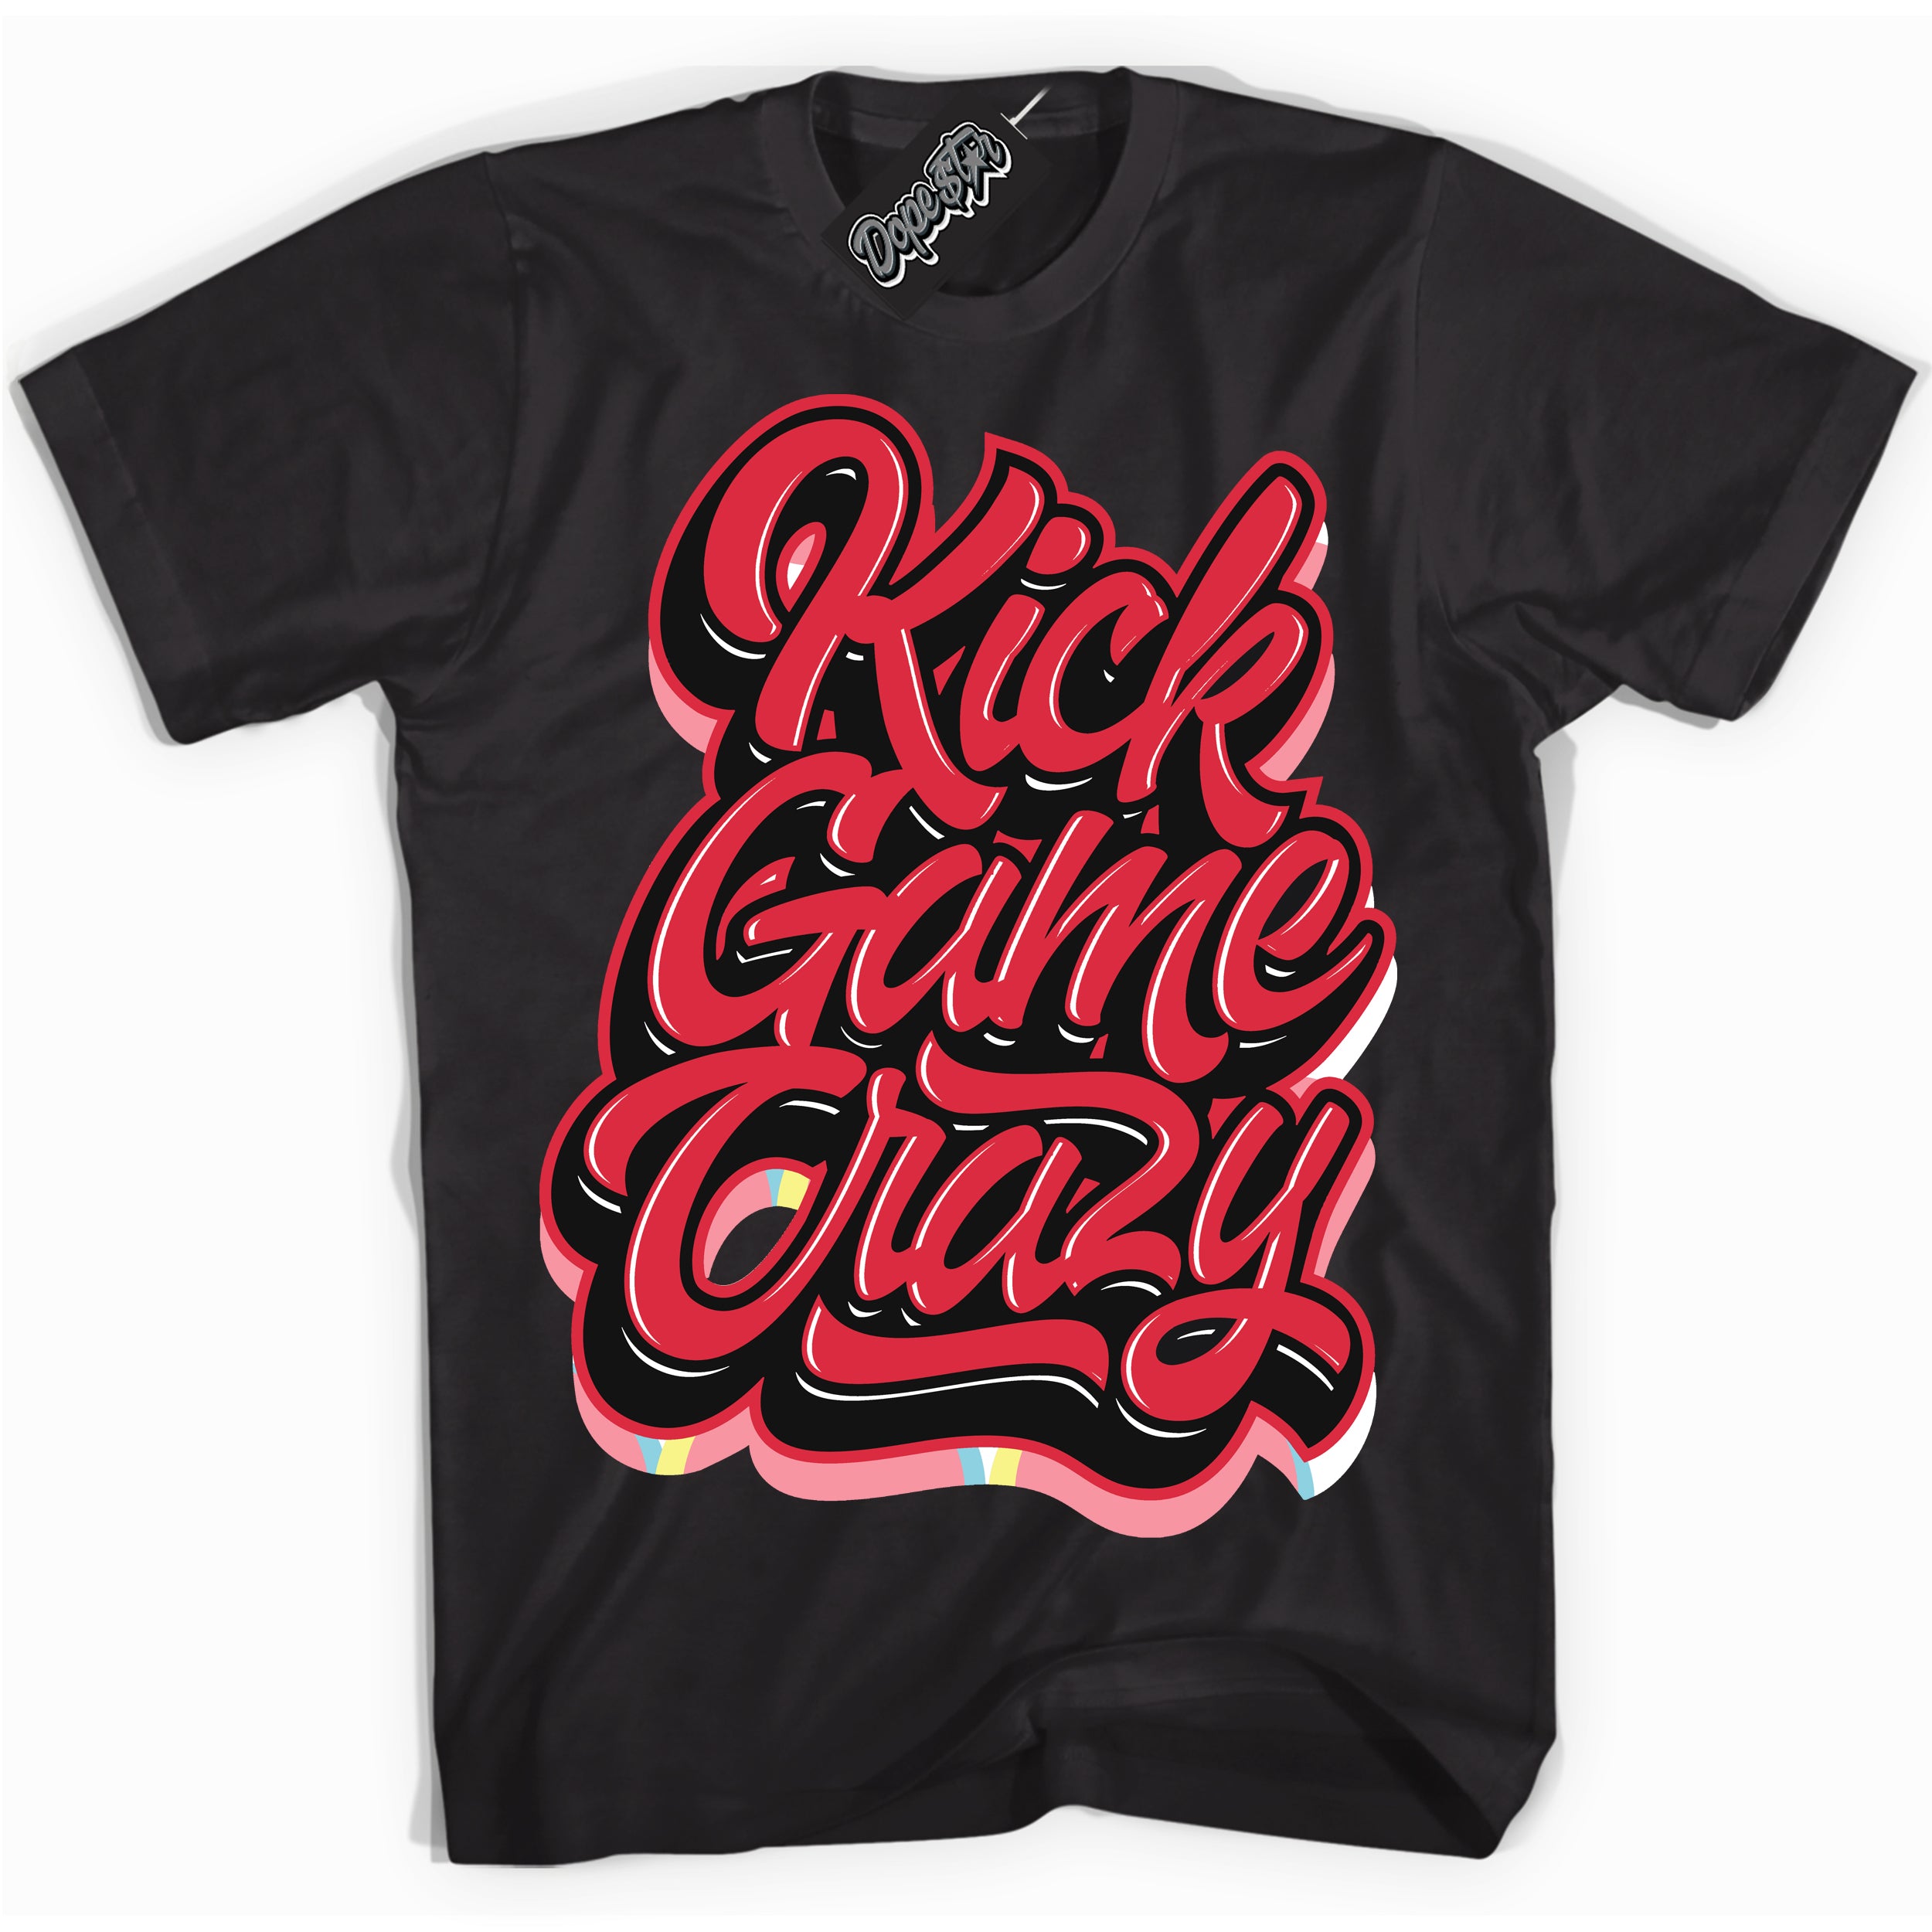 Cool Black graphic tee with “ Kick Game Crazy ” design, that perfectly matches Spider-Verse 1s sneakers 